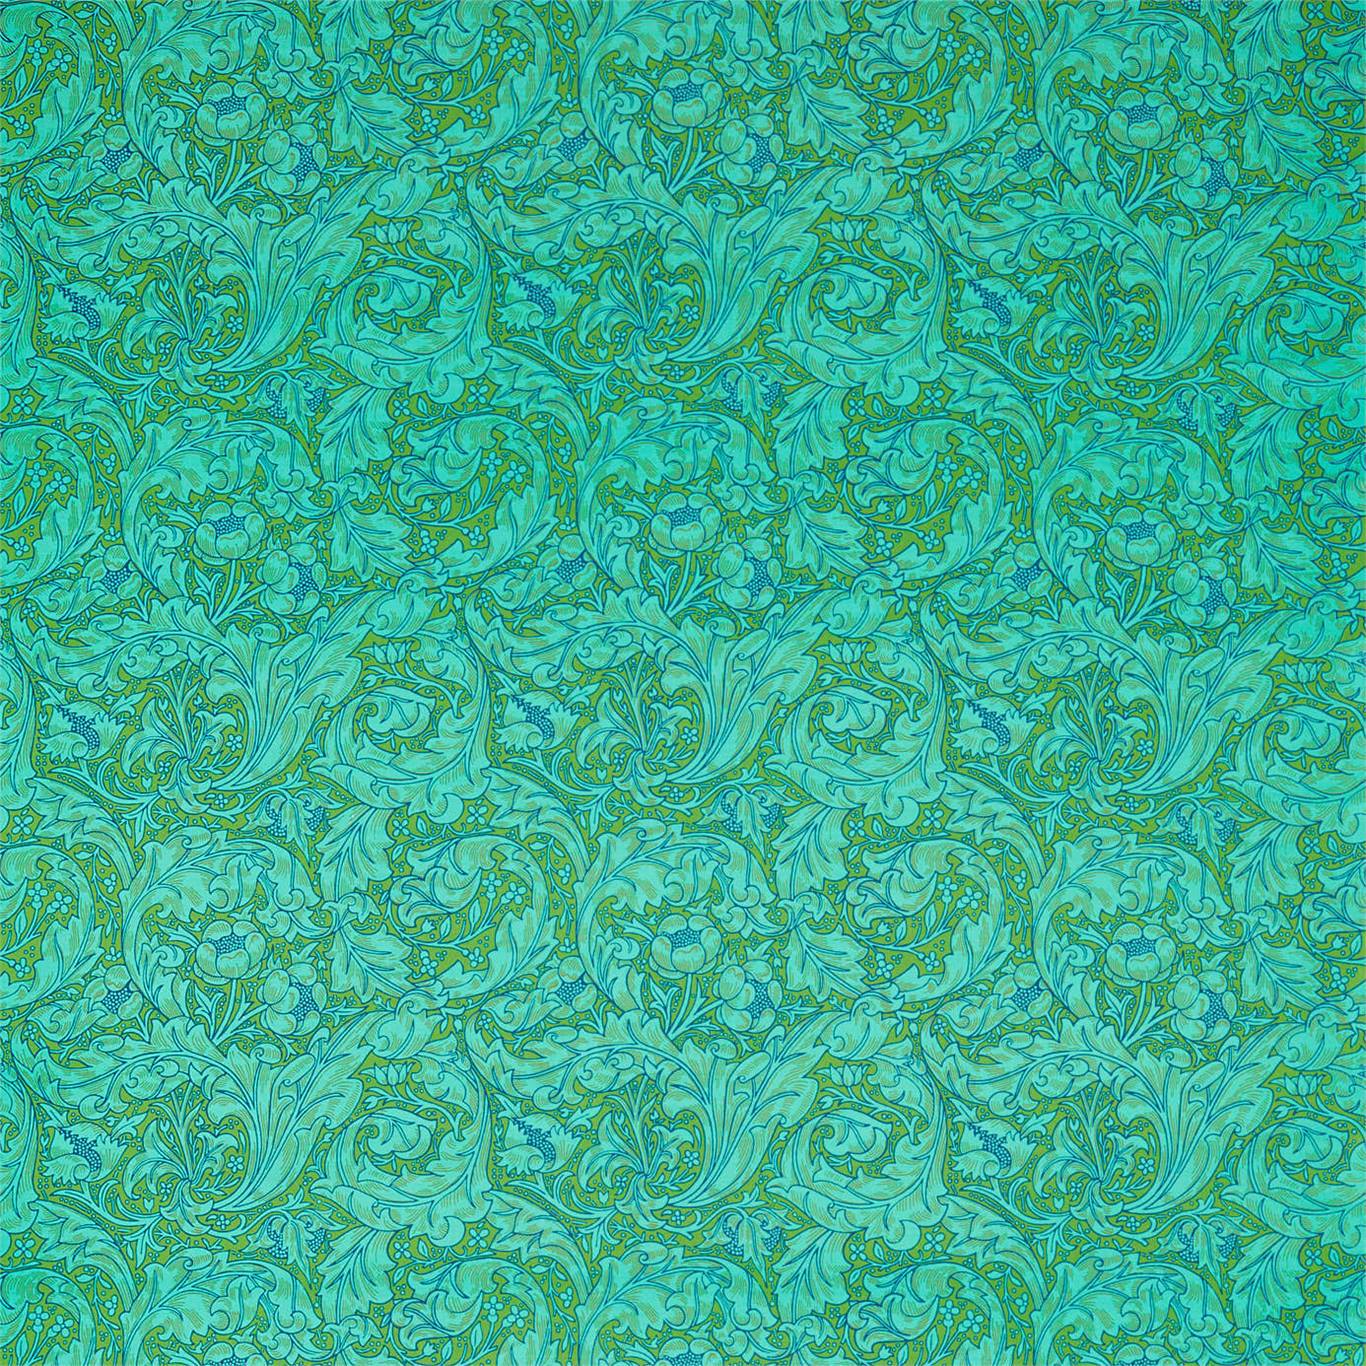 Bachelors Button Olive/Turquoise Fabric by MOR